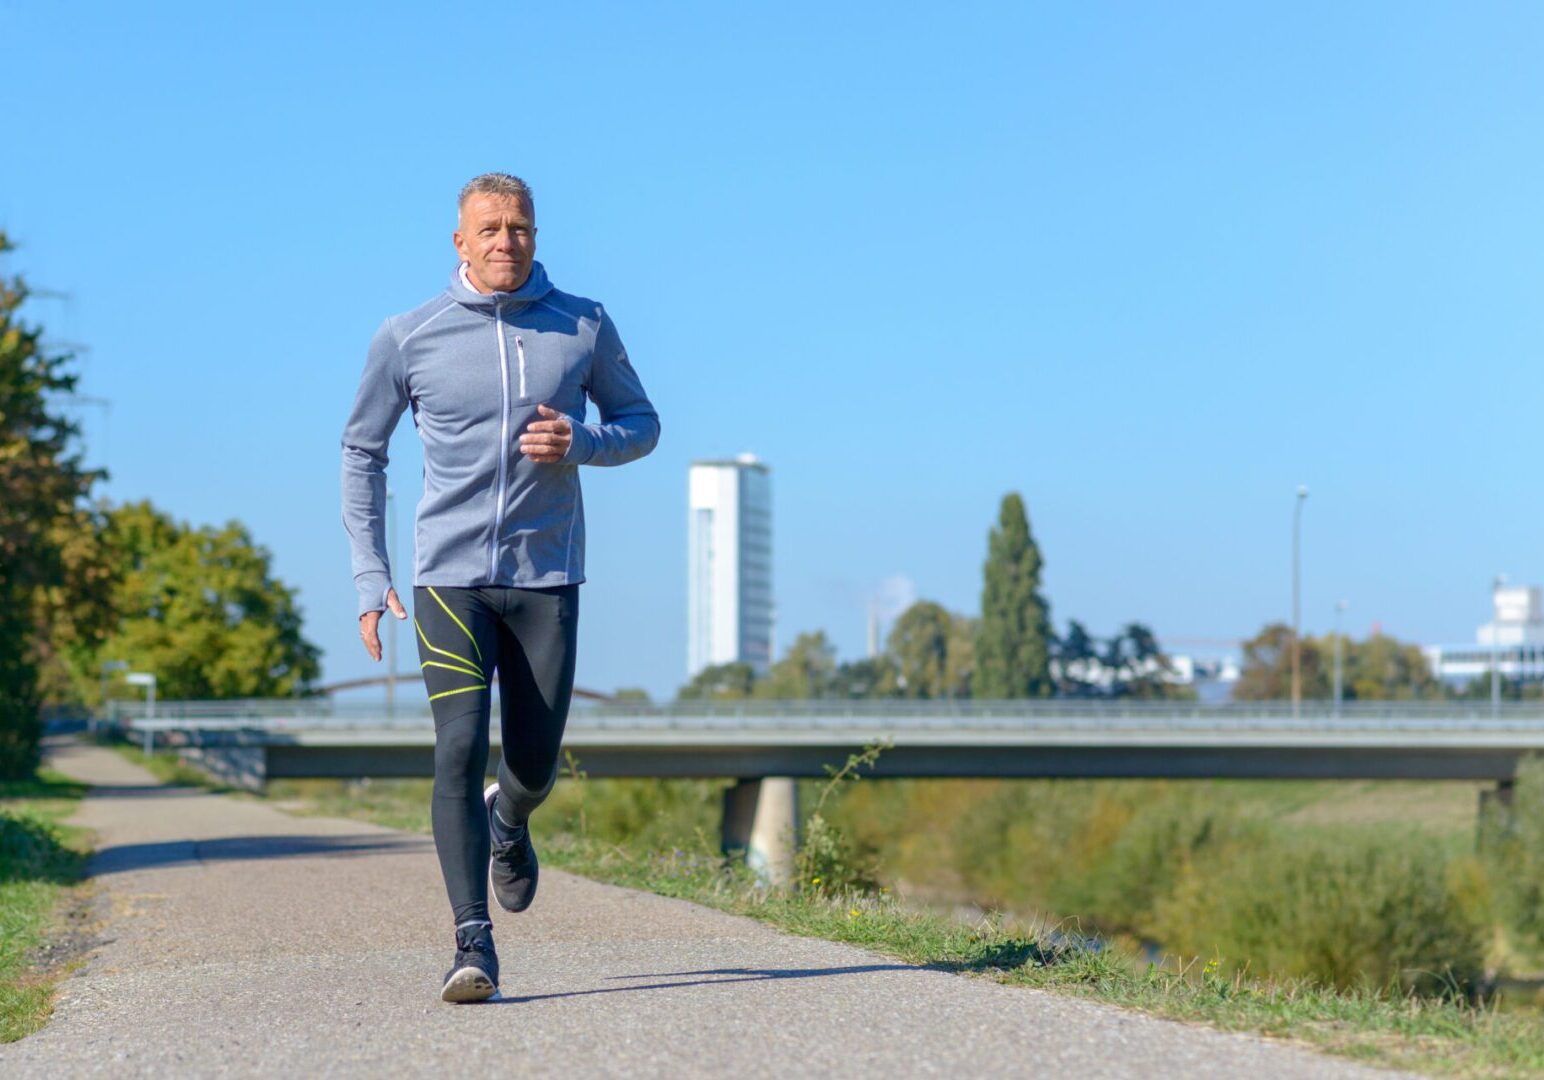 Middle-aged man jogging along alley in park on sunny day